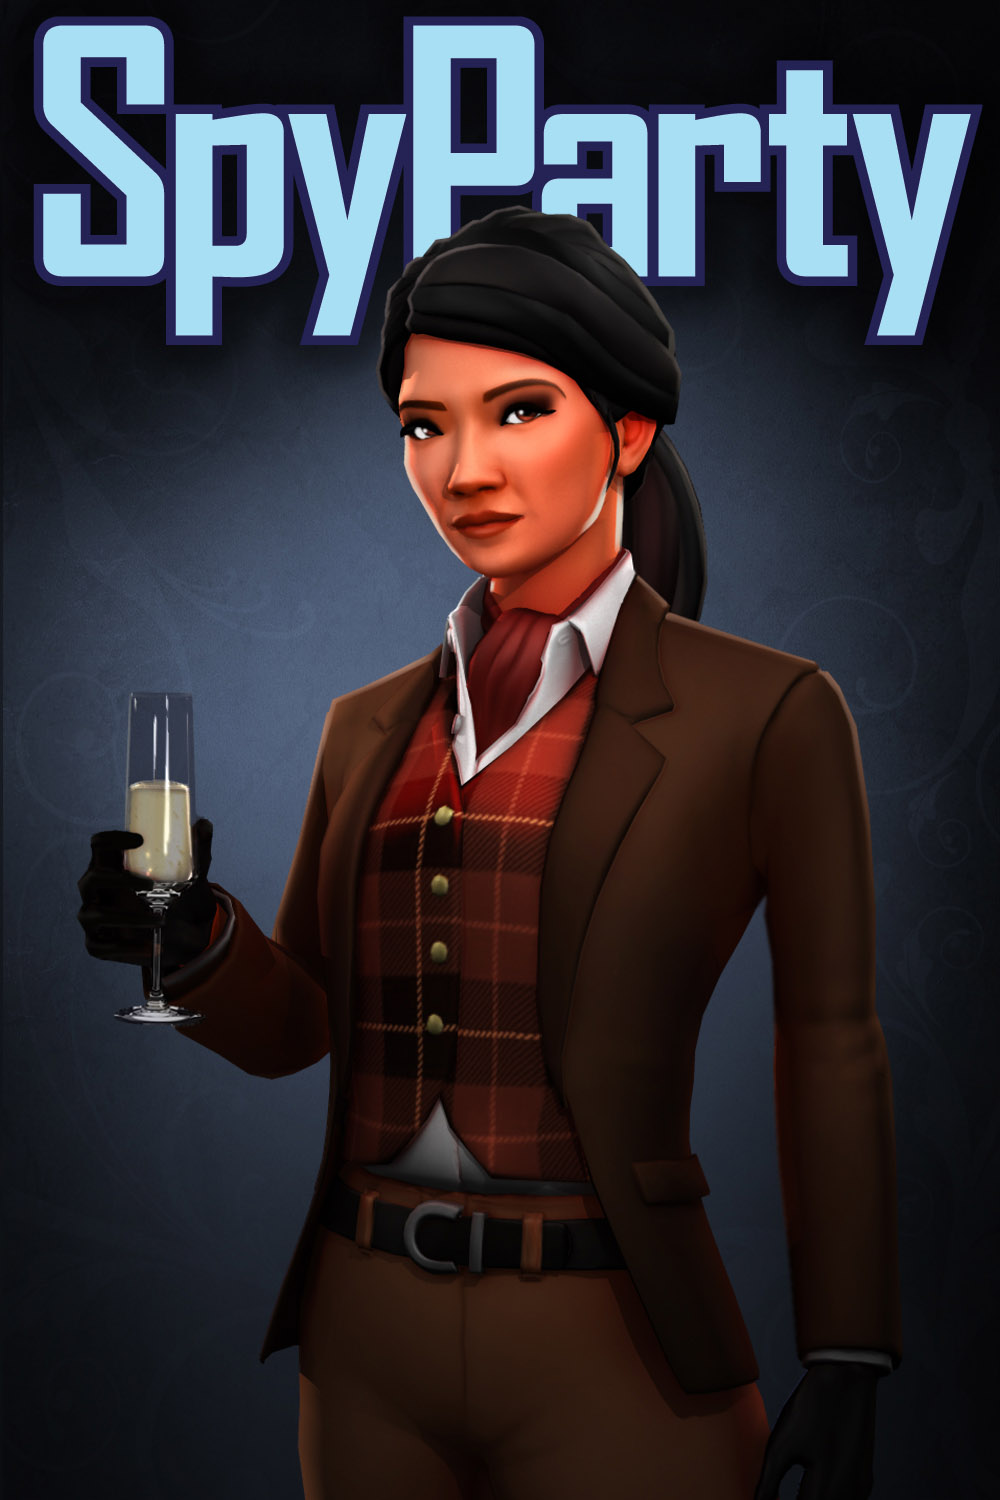 spyparty all characters